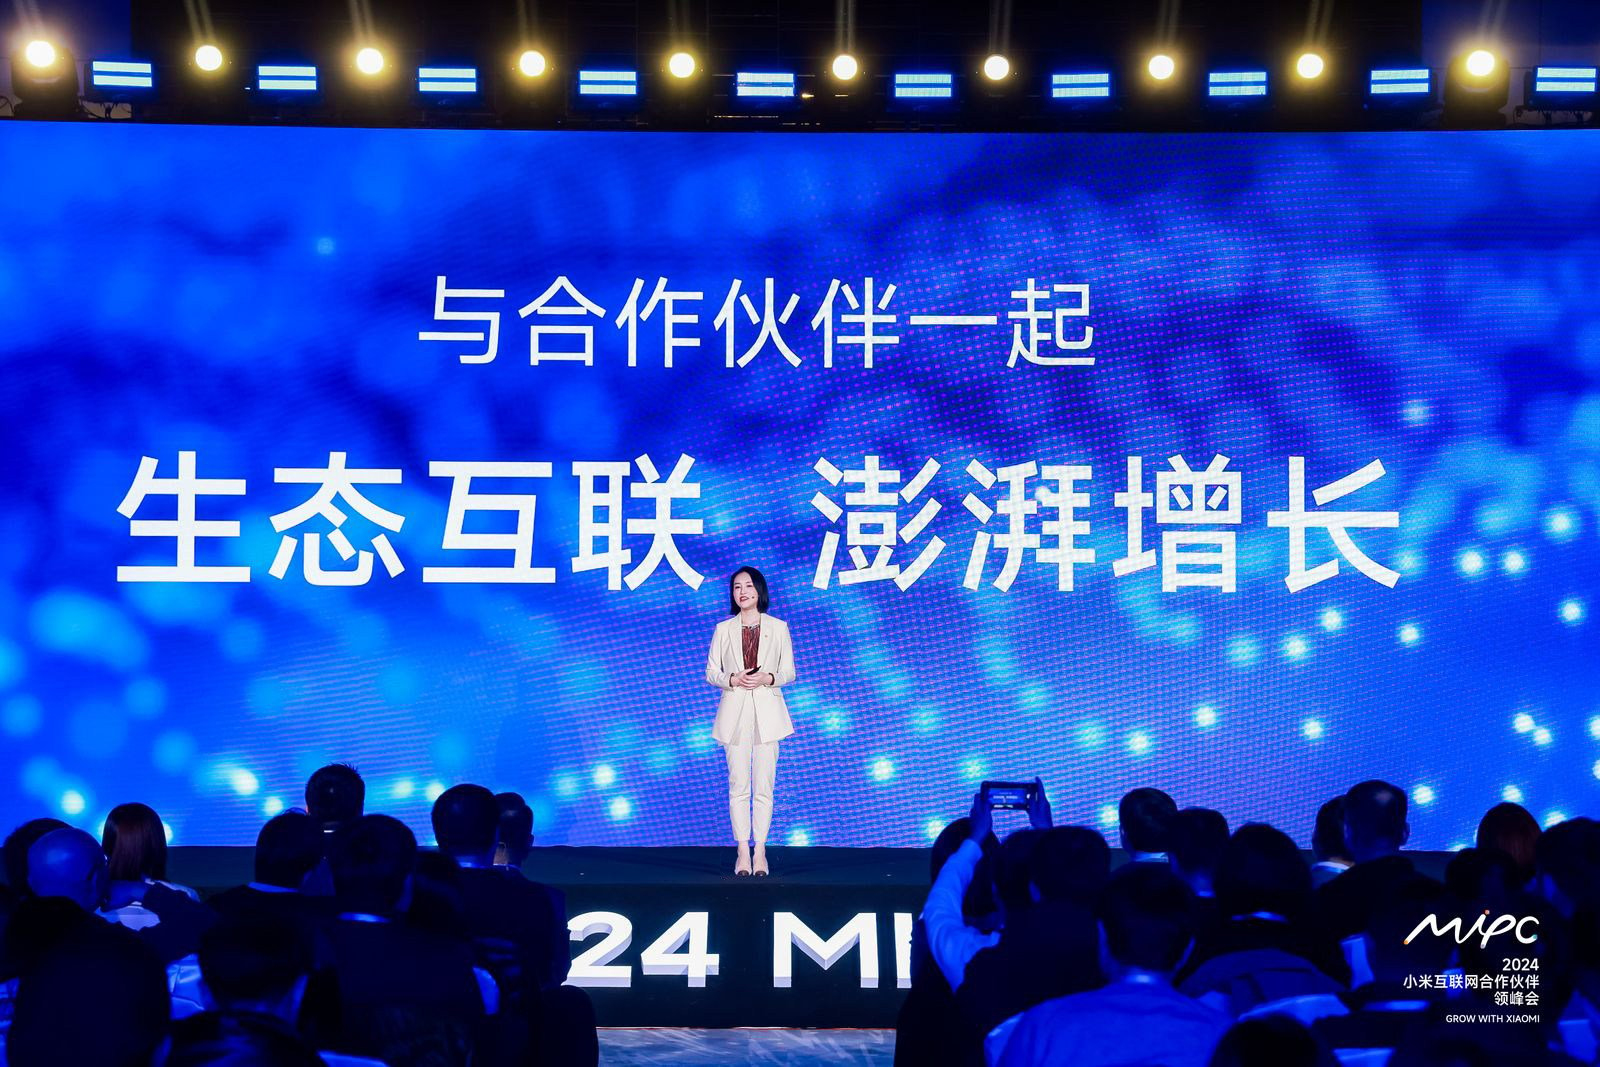 Chan Liu, general manager, internet business department, Xiaomi, speaks at the Xiaomi Internet Partner Conference in Beijing last year. The conference is company’s biggest annual global event for its internet business. 